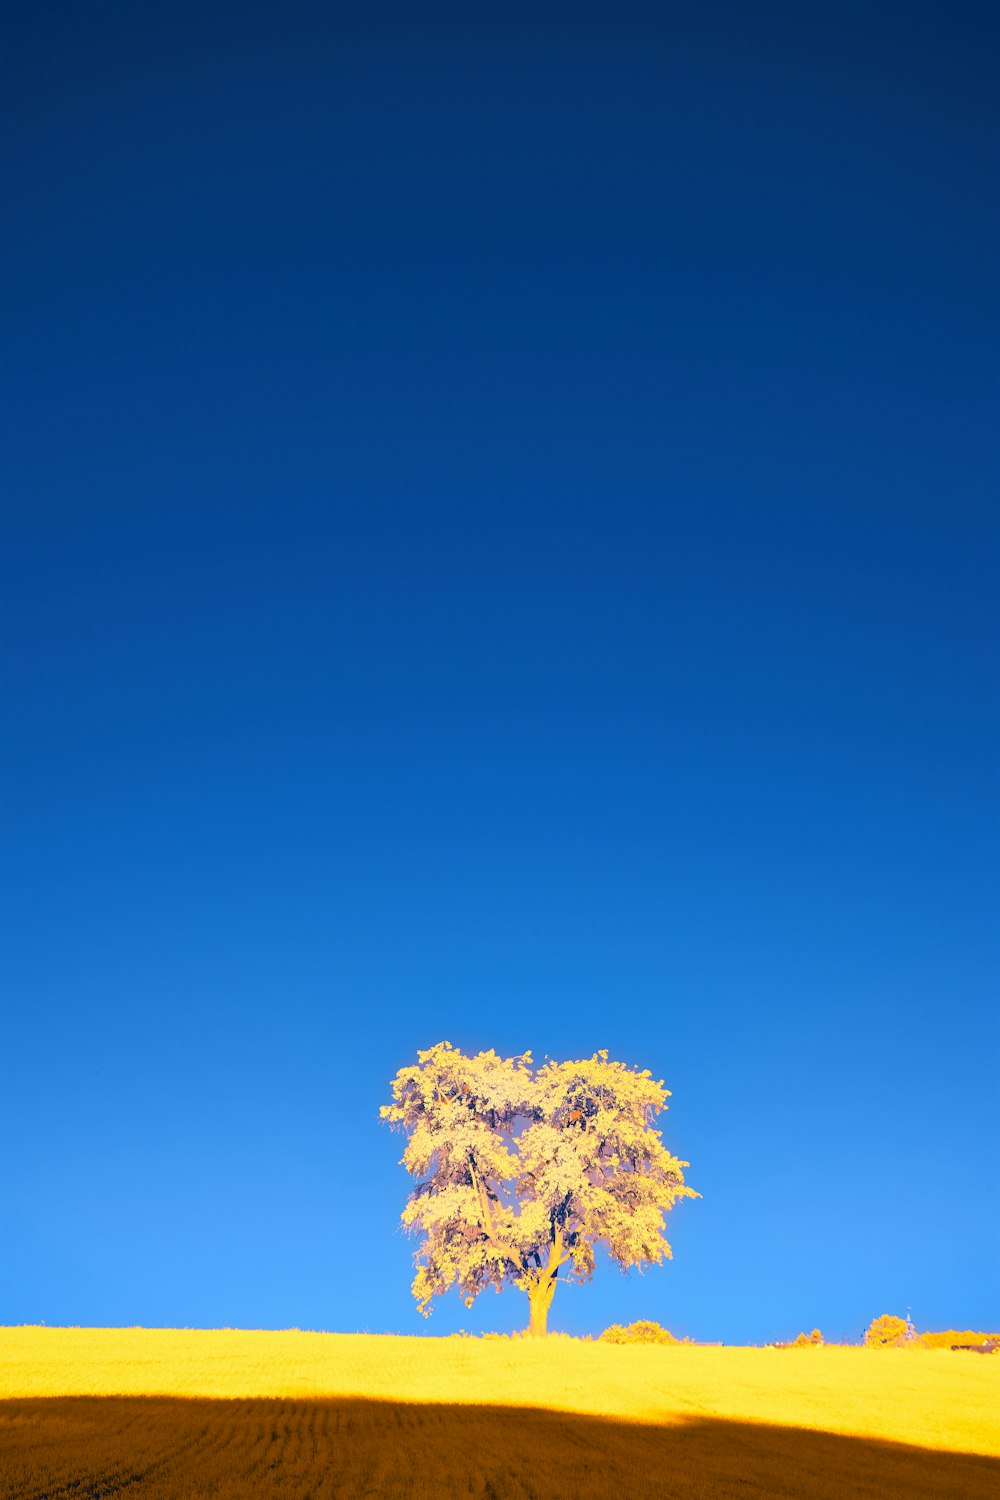 a lone tree in the middle of a yellow field